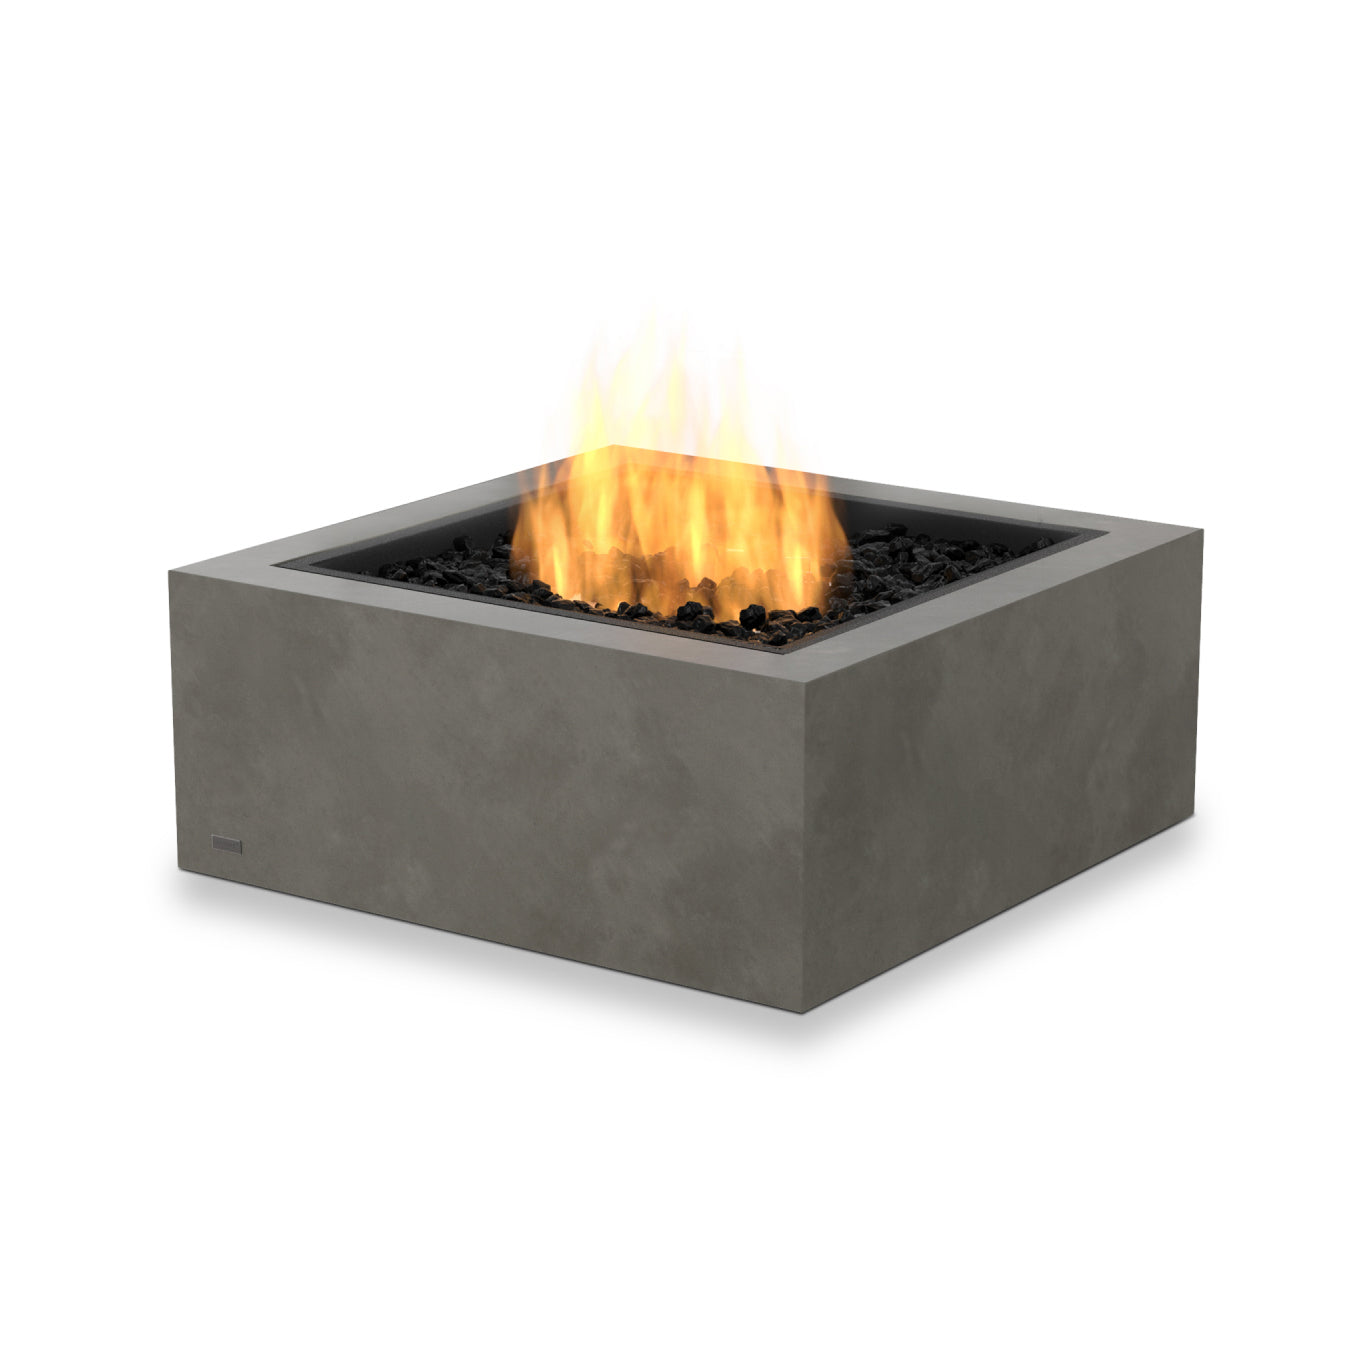 BASE 30 FIRE PIT TABLE - NATURAL GAS / LIQUID PROPANE